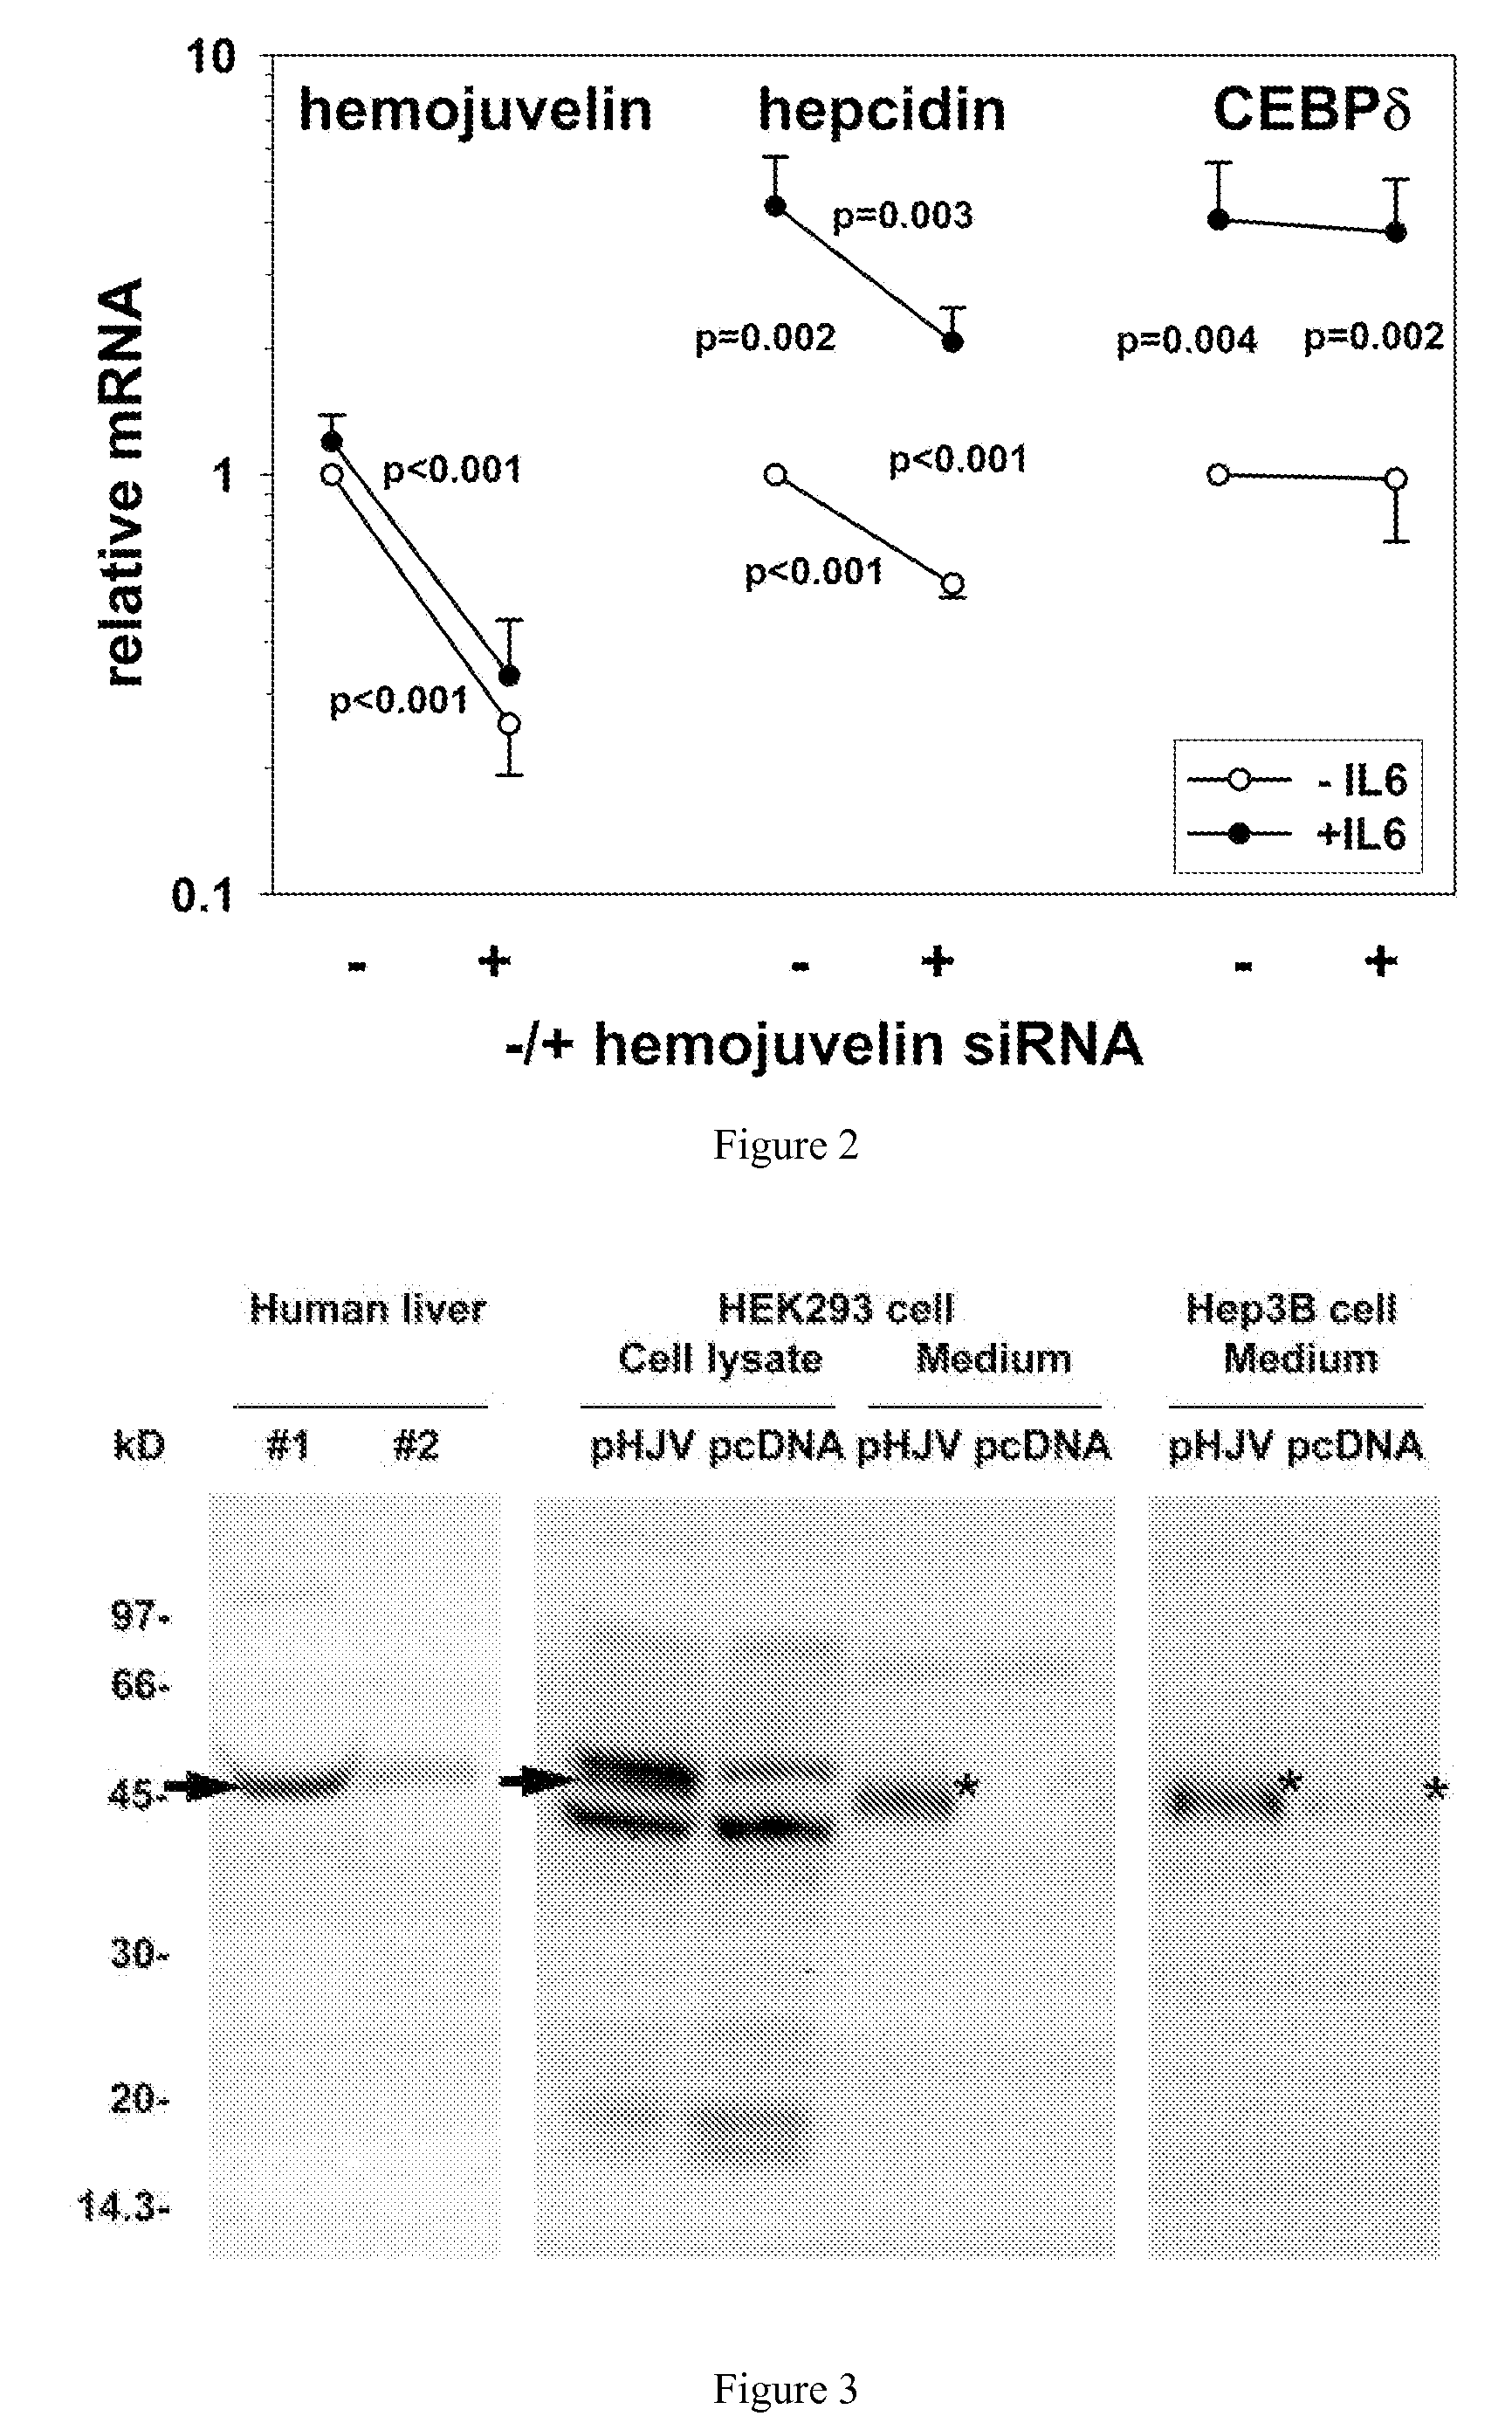 Competitive Regulation of Hepcidin mRNA by Soluble and Cell-Associated Hemojuvelin